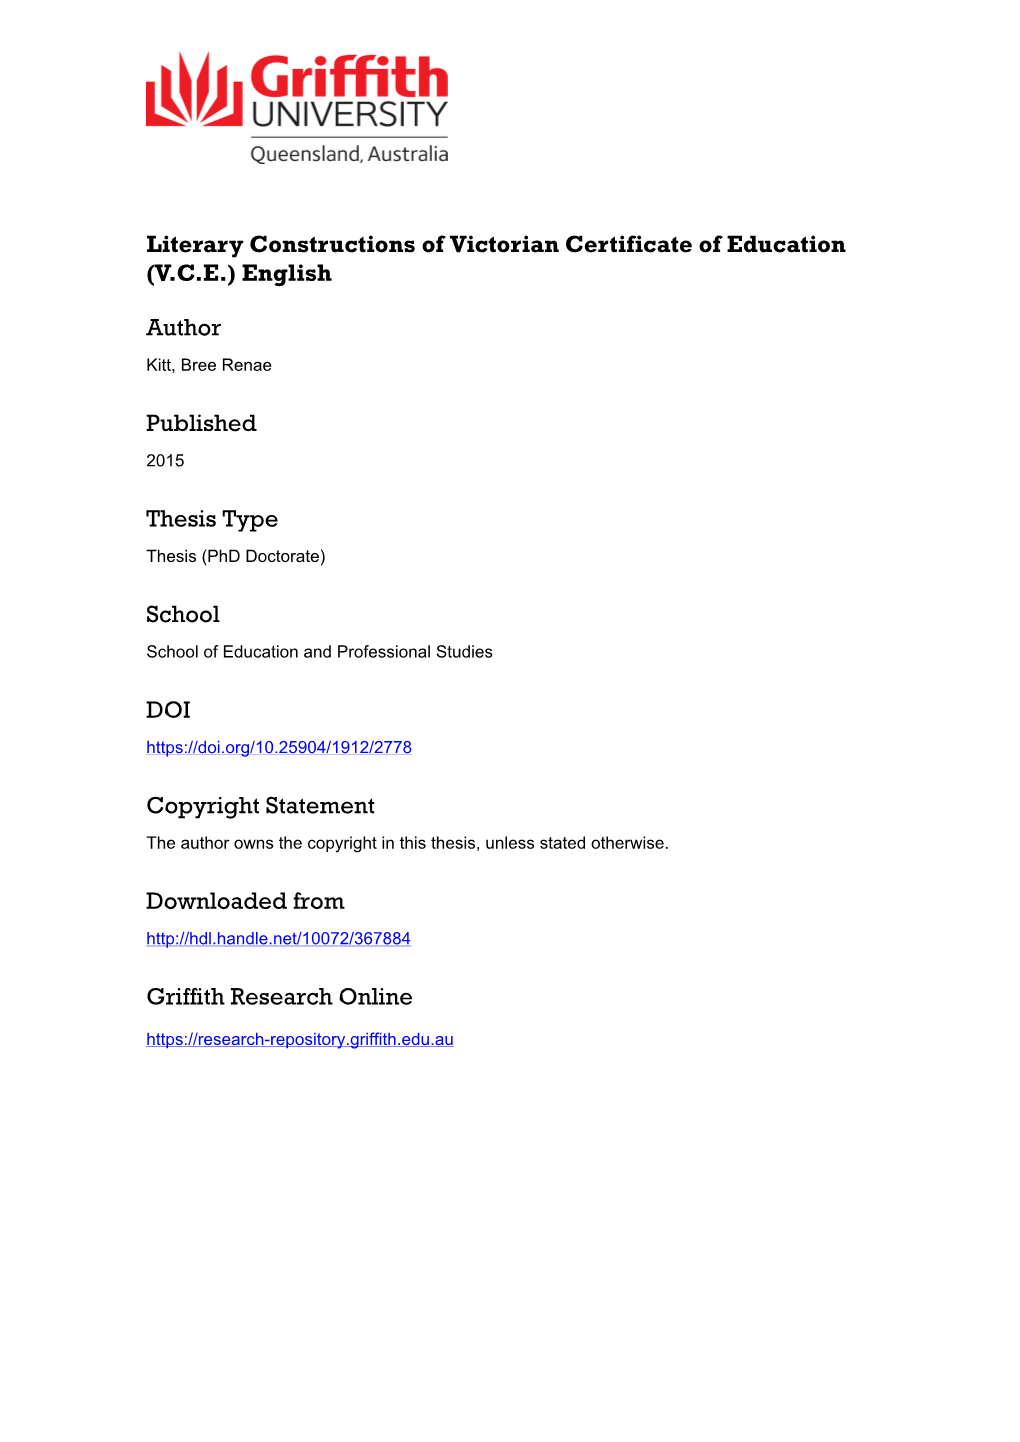 Literary Constructions of Victorian Certificate of Education (VCE)